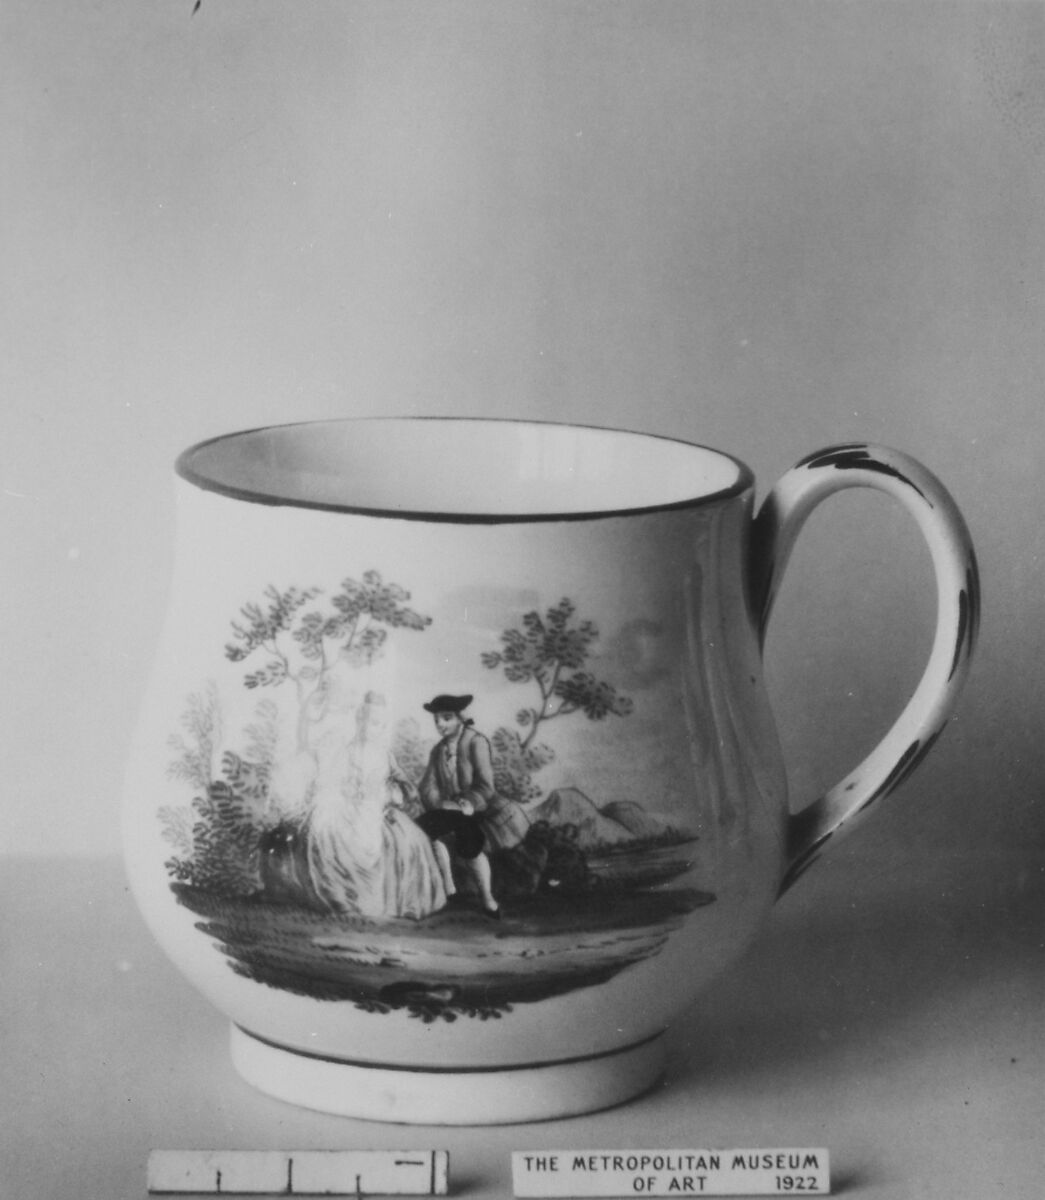 Cup (part of a set), Wedgwood and Co., Creamware, British, Etruria, Staffordshire 